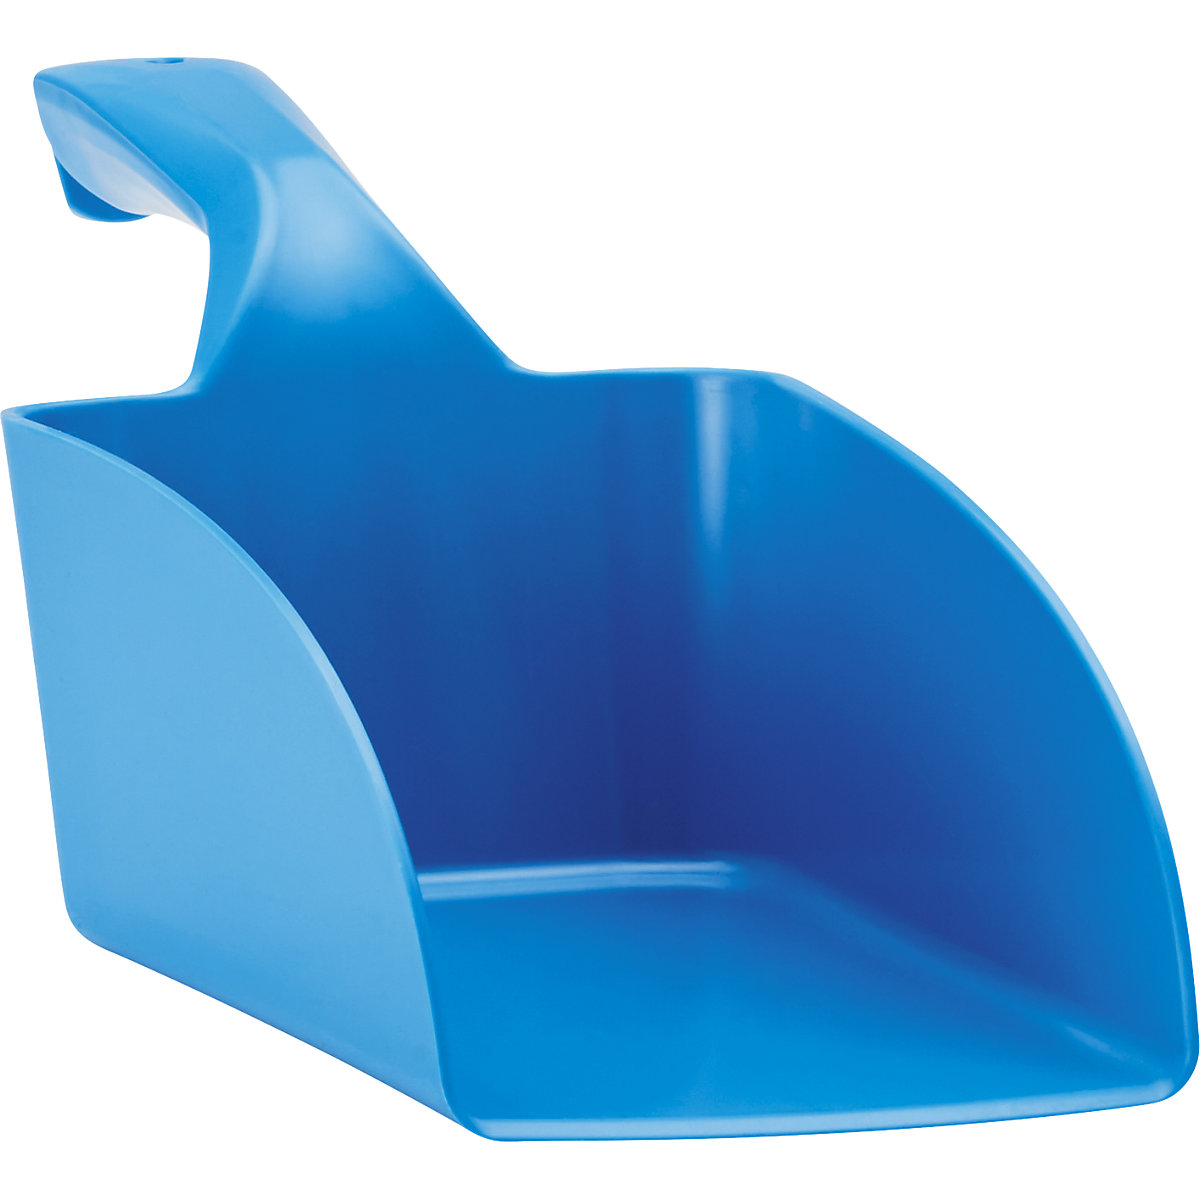 Hand shovel, suitable for foodstuffs – Vikan, capacity 0.5 l, pack of 15, blue